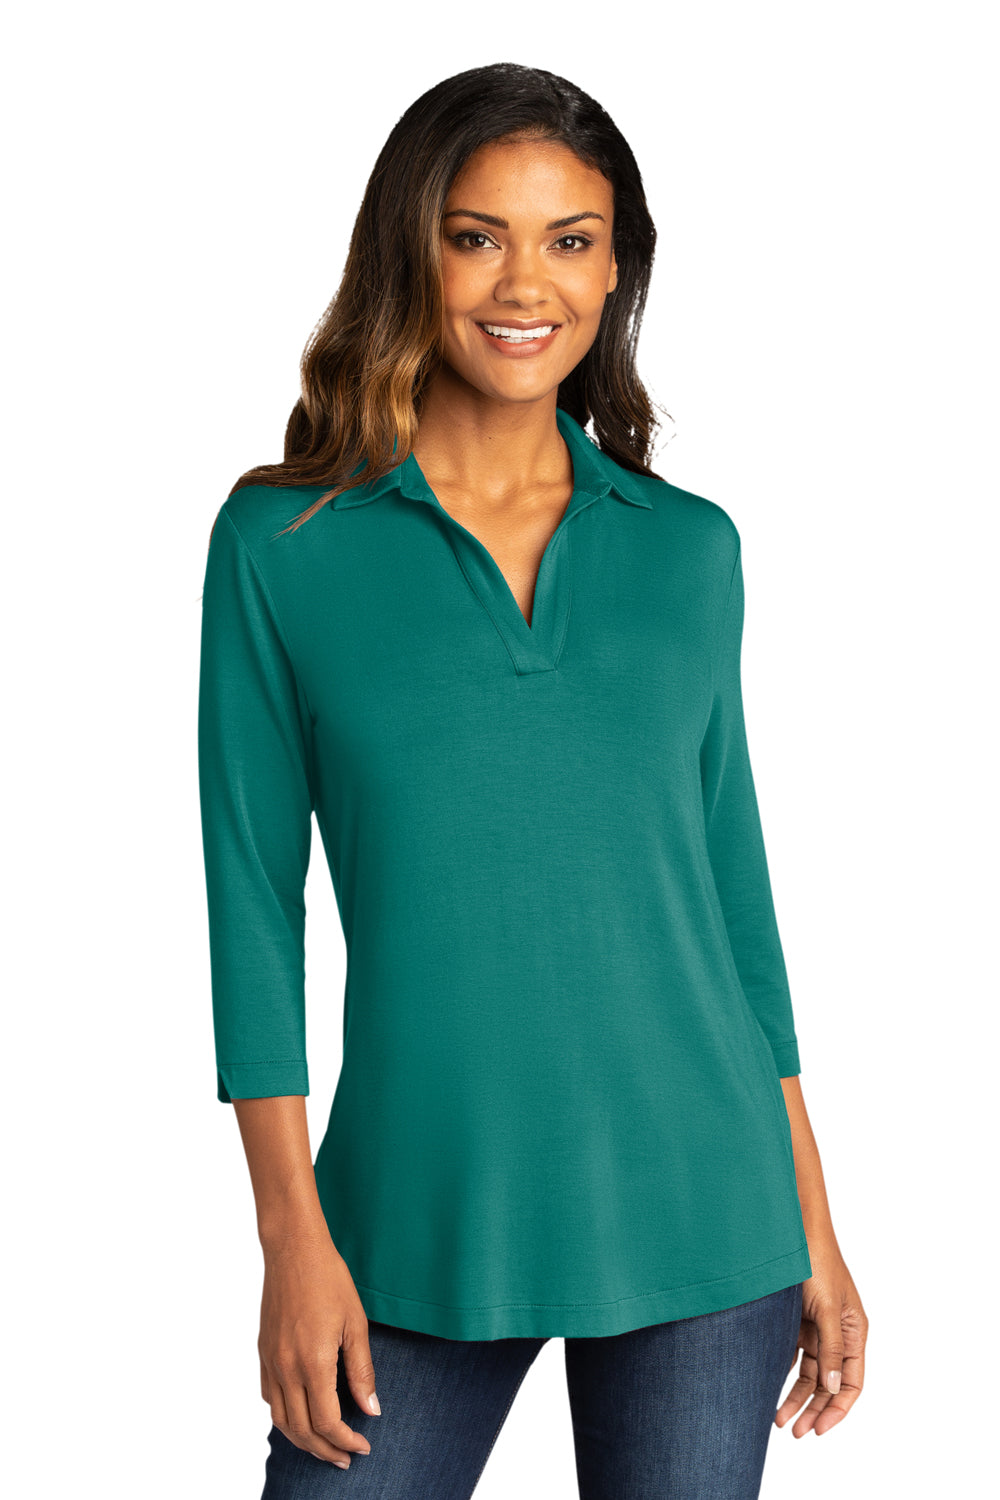 Port Authority Womens Luxe Knit 3/4 Sleeve Polo Shirt Teal Green Front